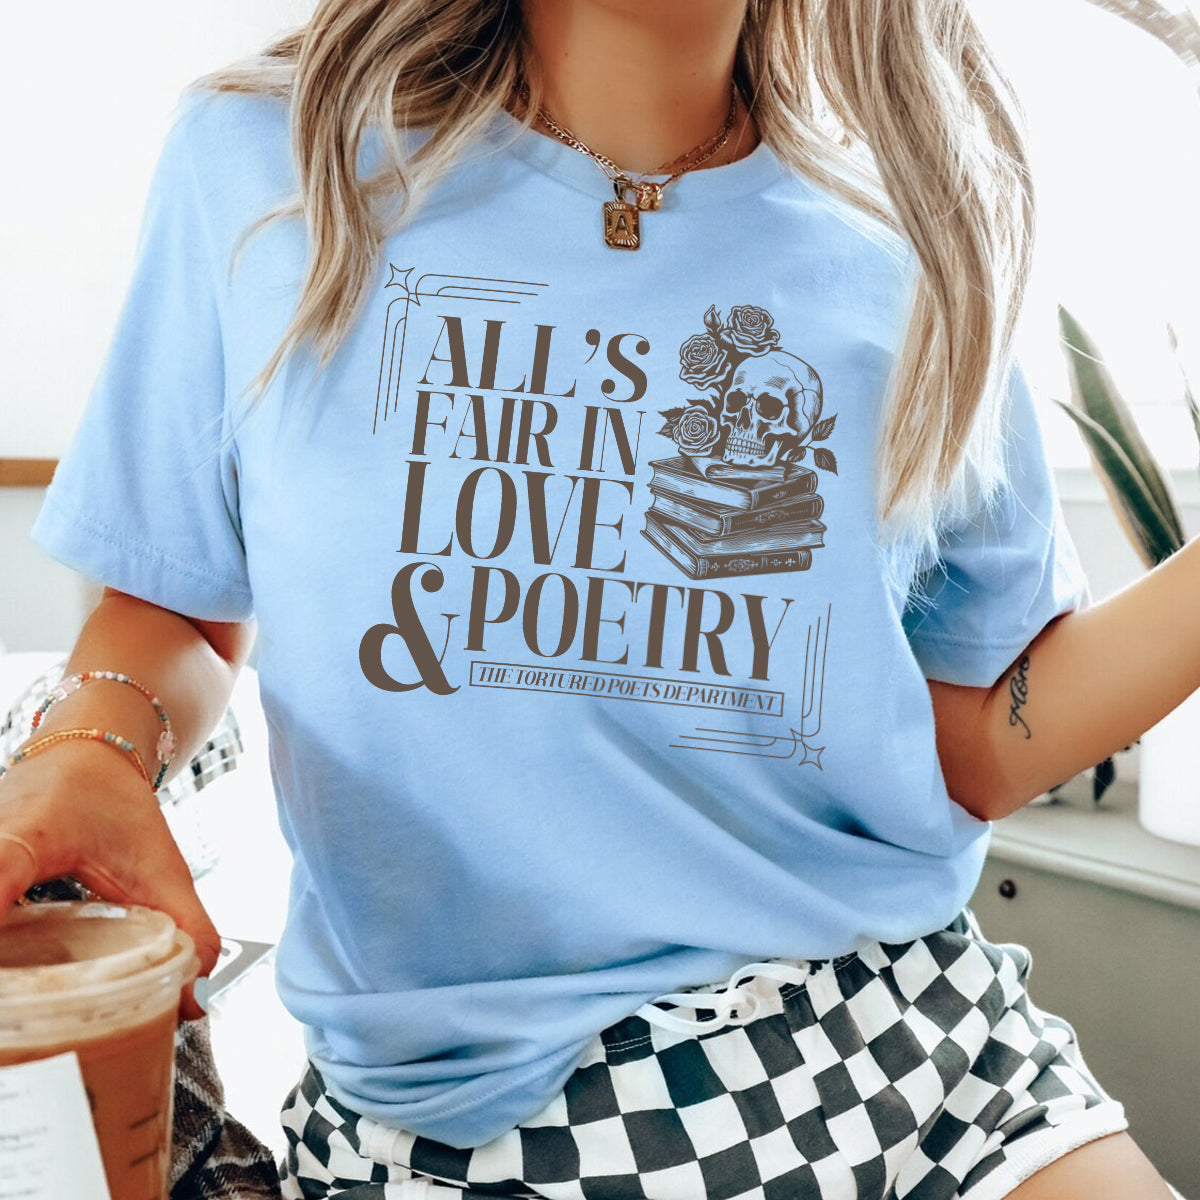 alls fair in love and poetry the tortured poets department new album shirt 1713933589021.jpg